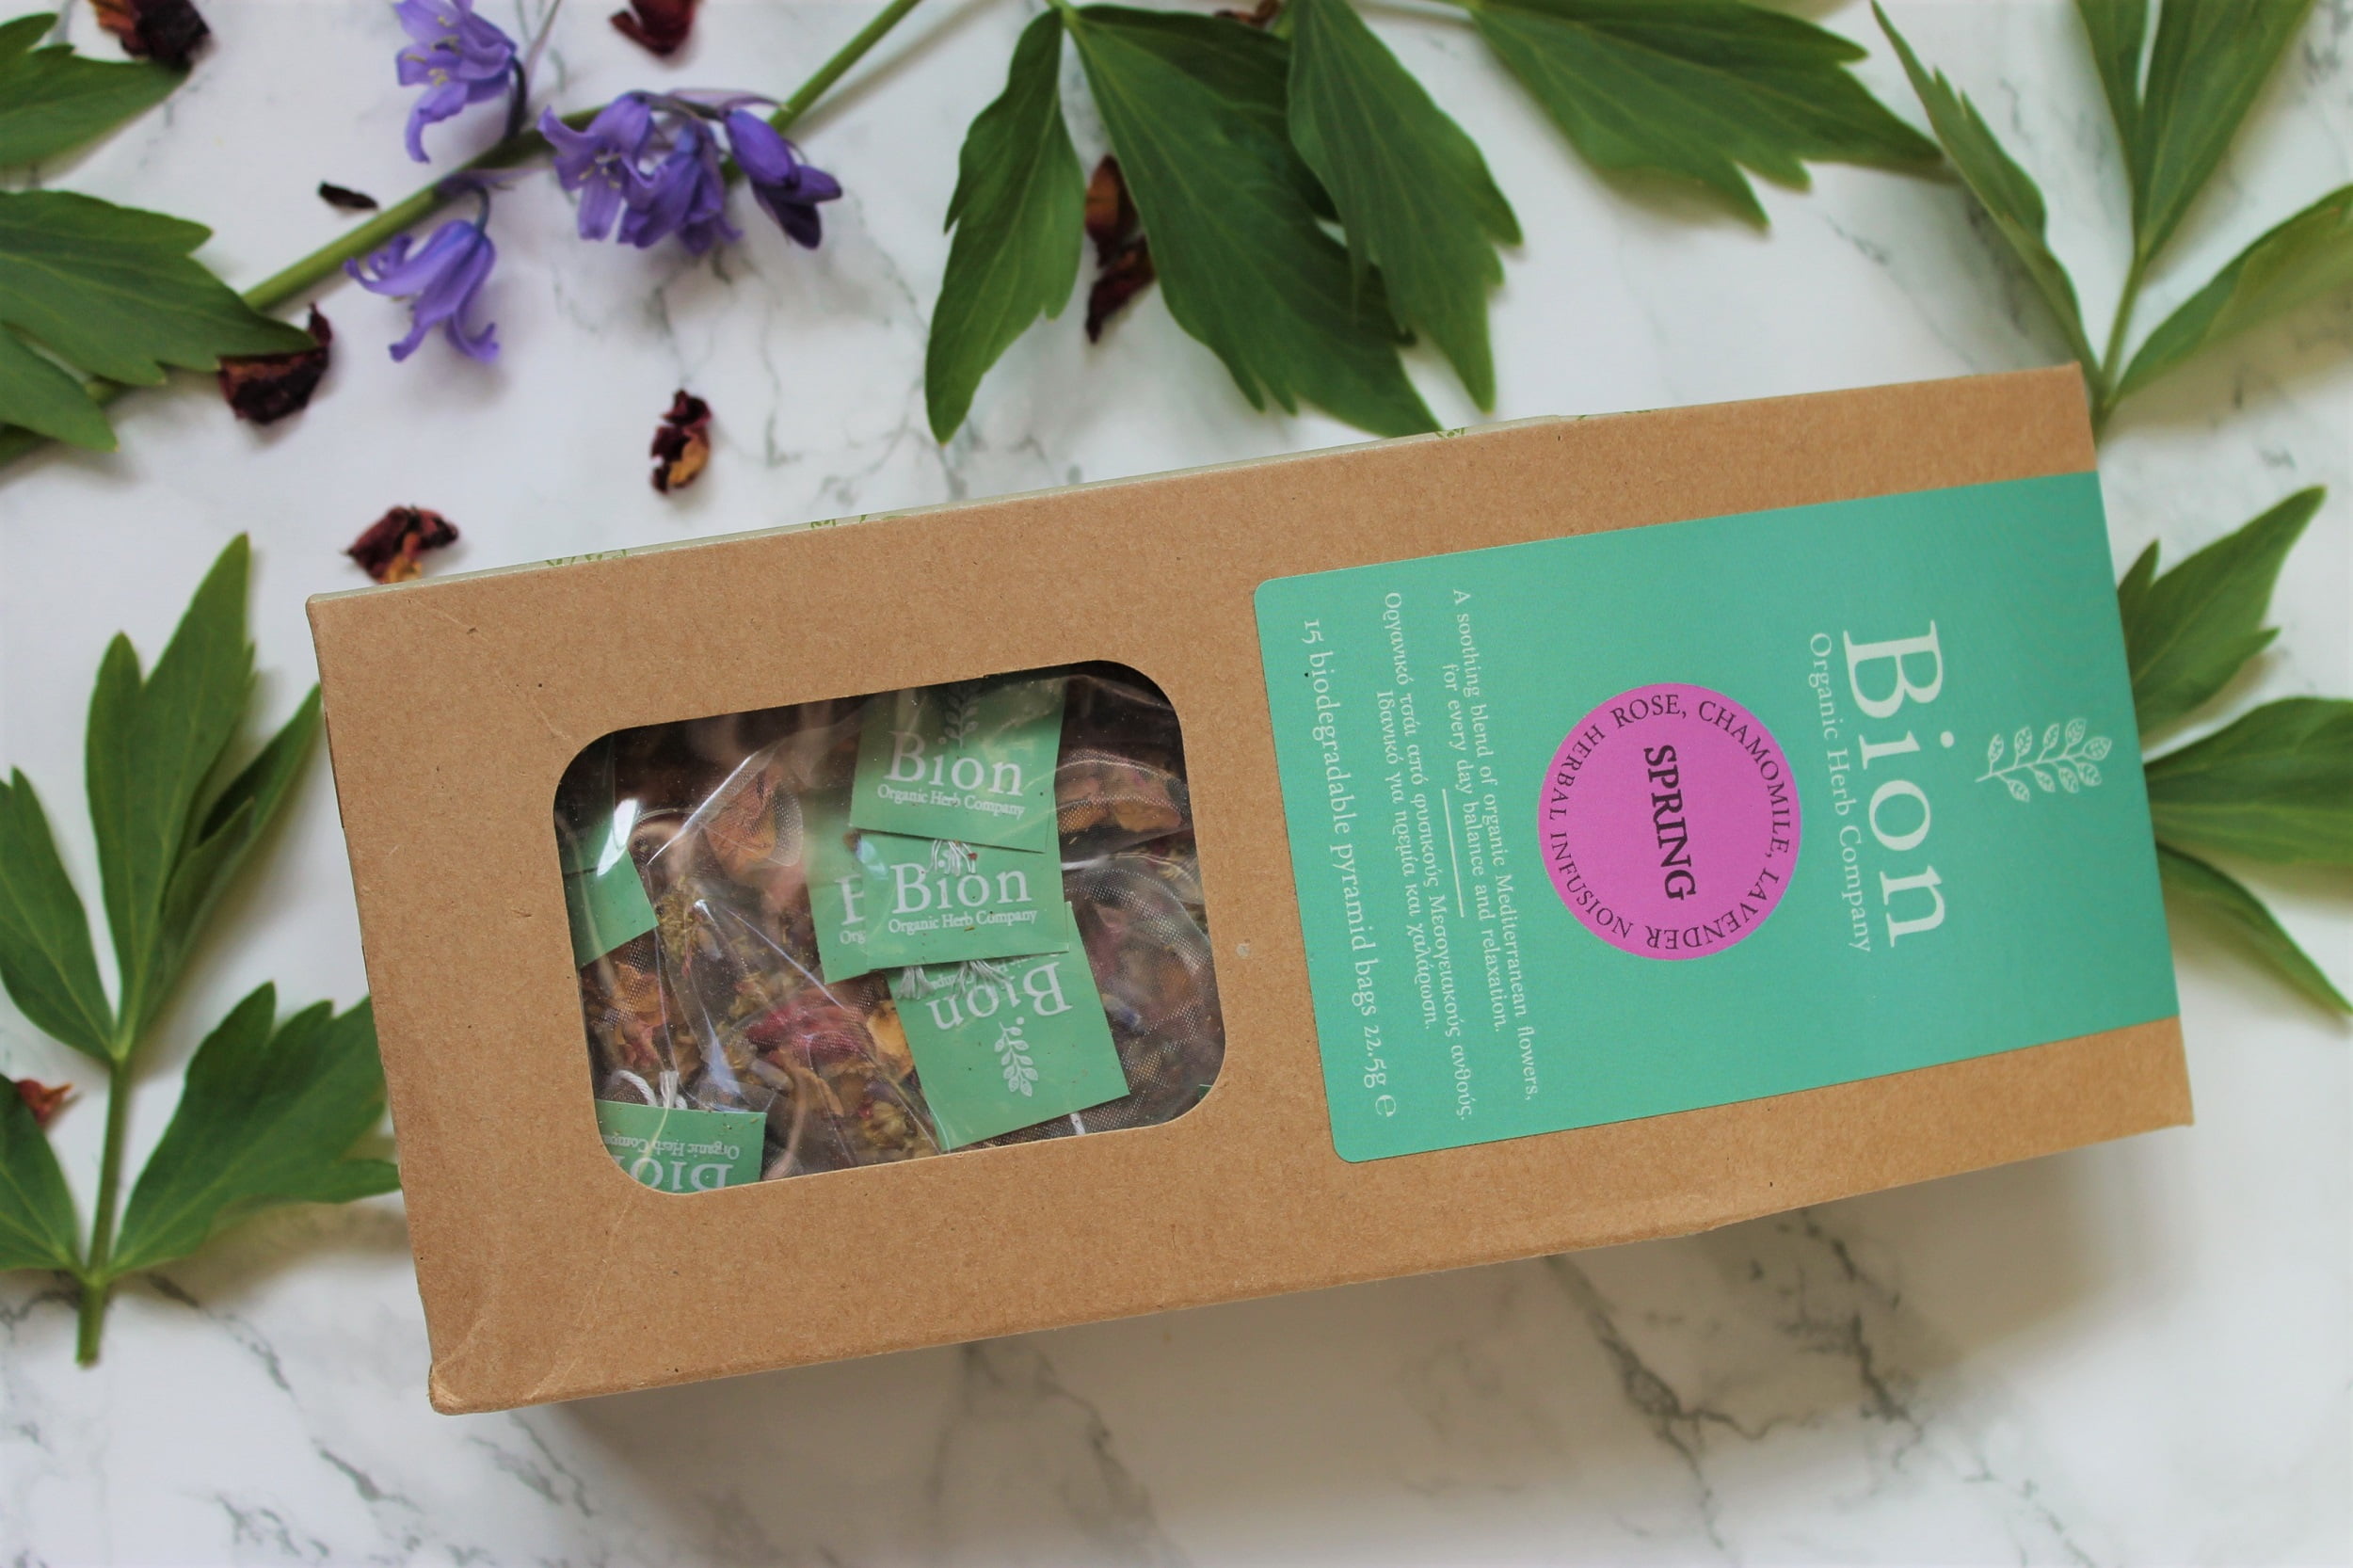 bion floral infusion